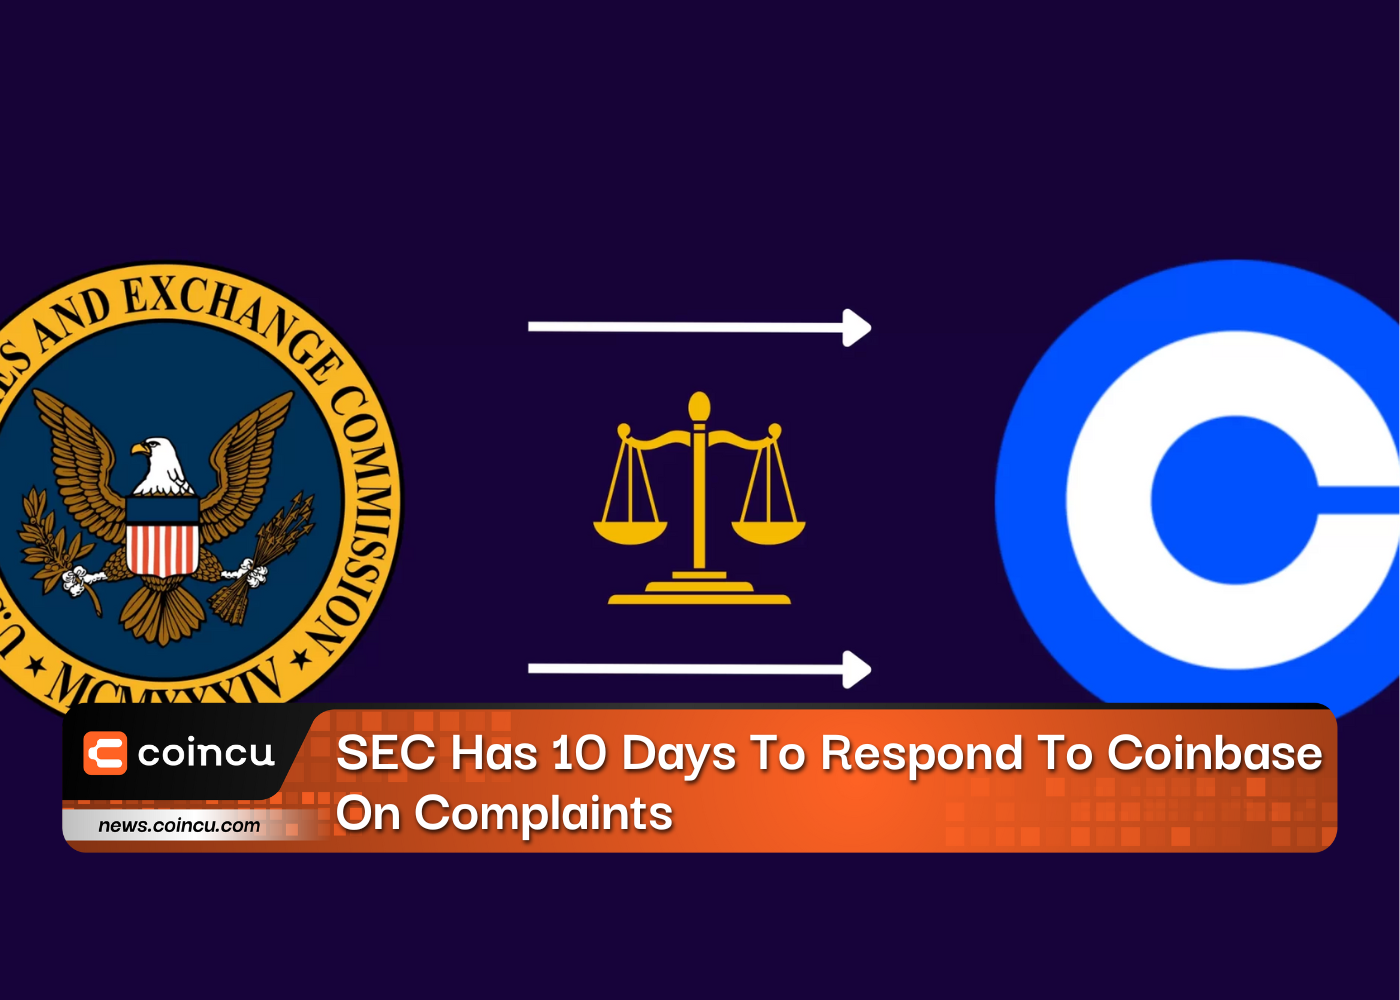 SEC Has 10 Days To Respond To Coinbase On Complaints